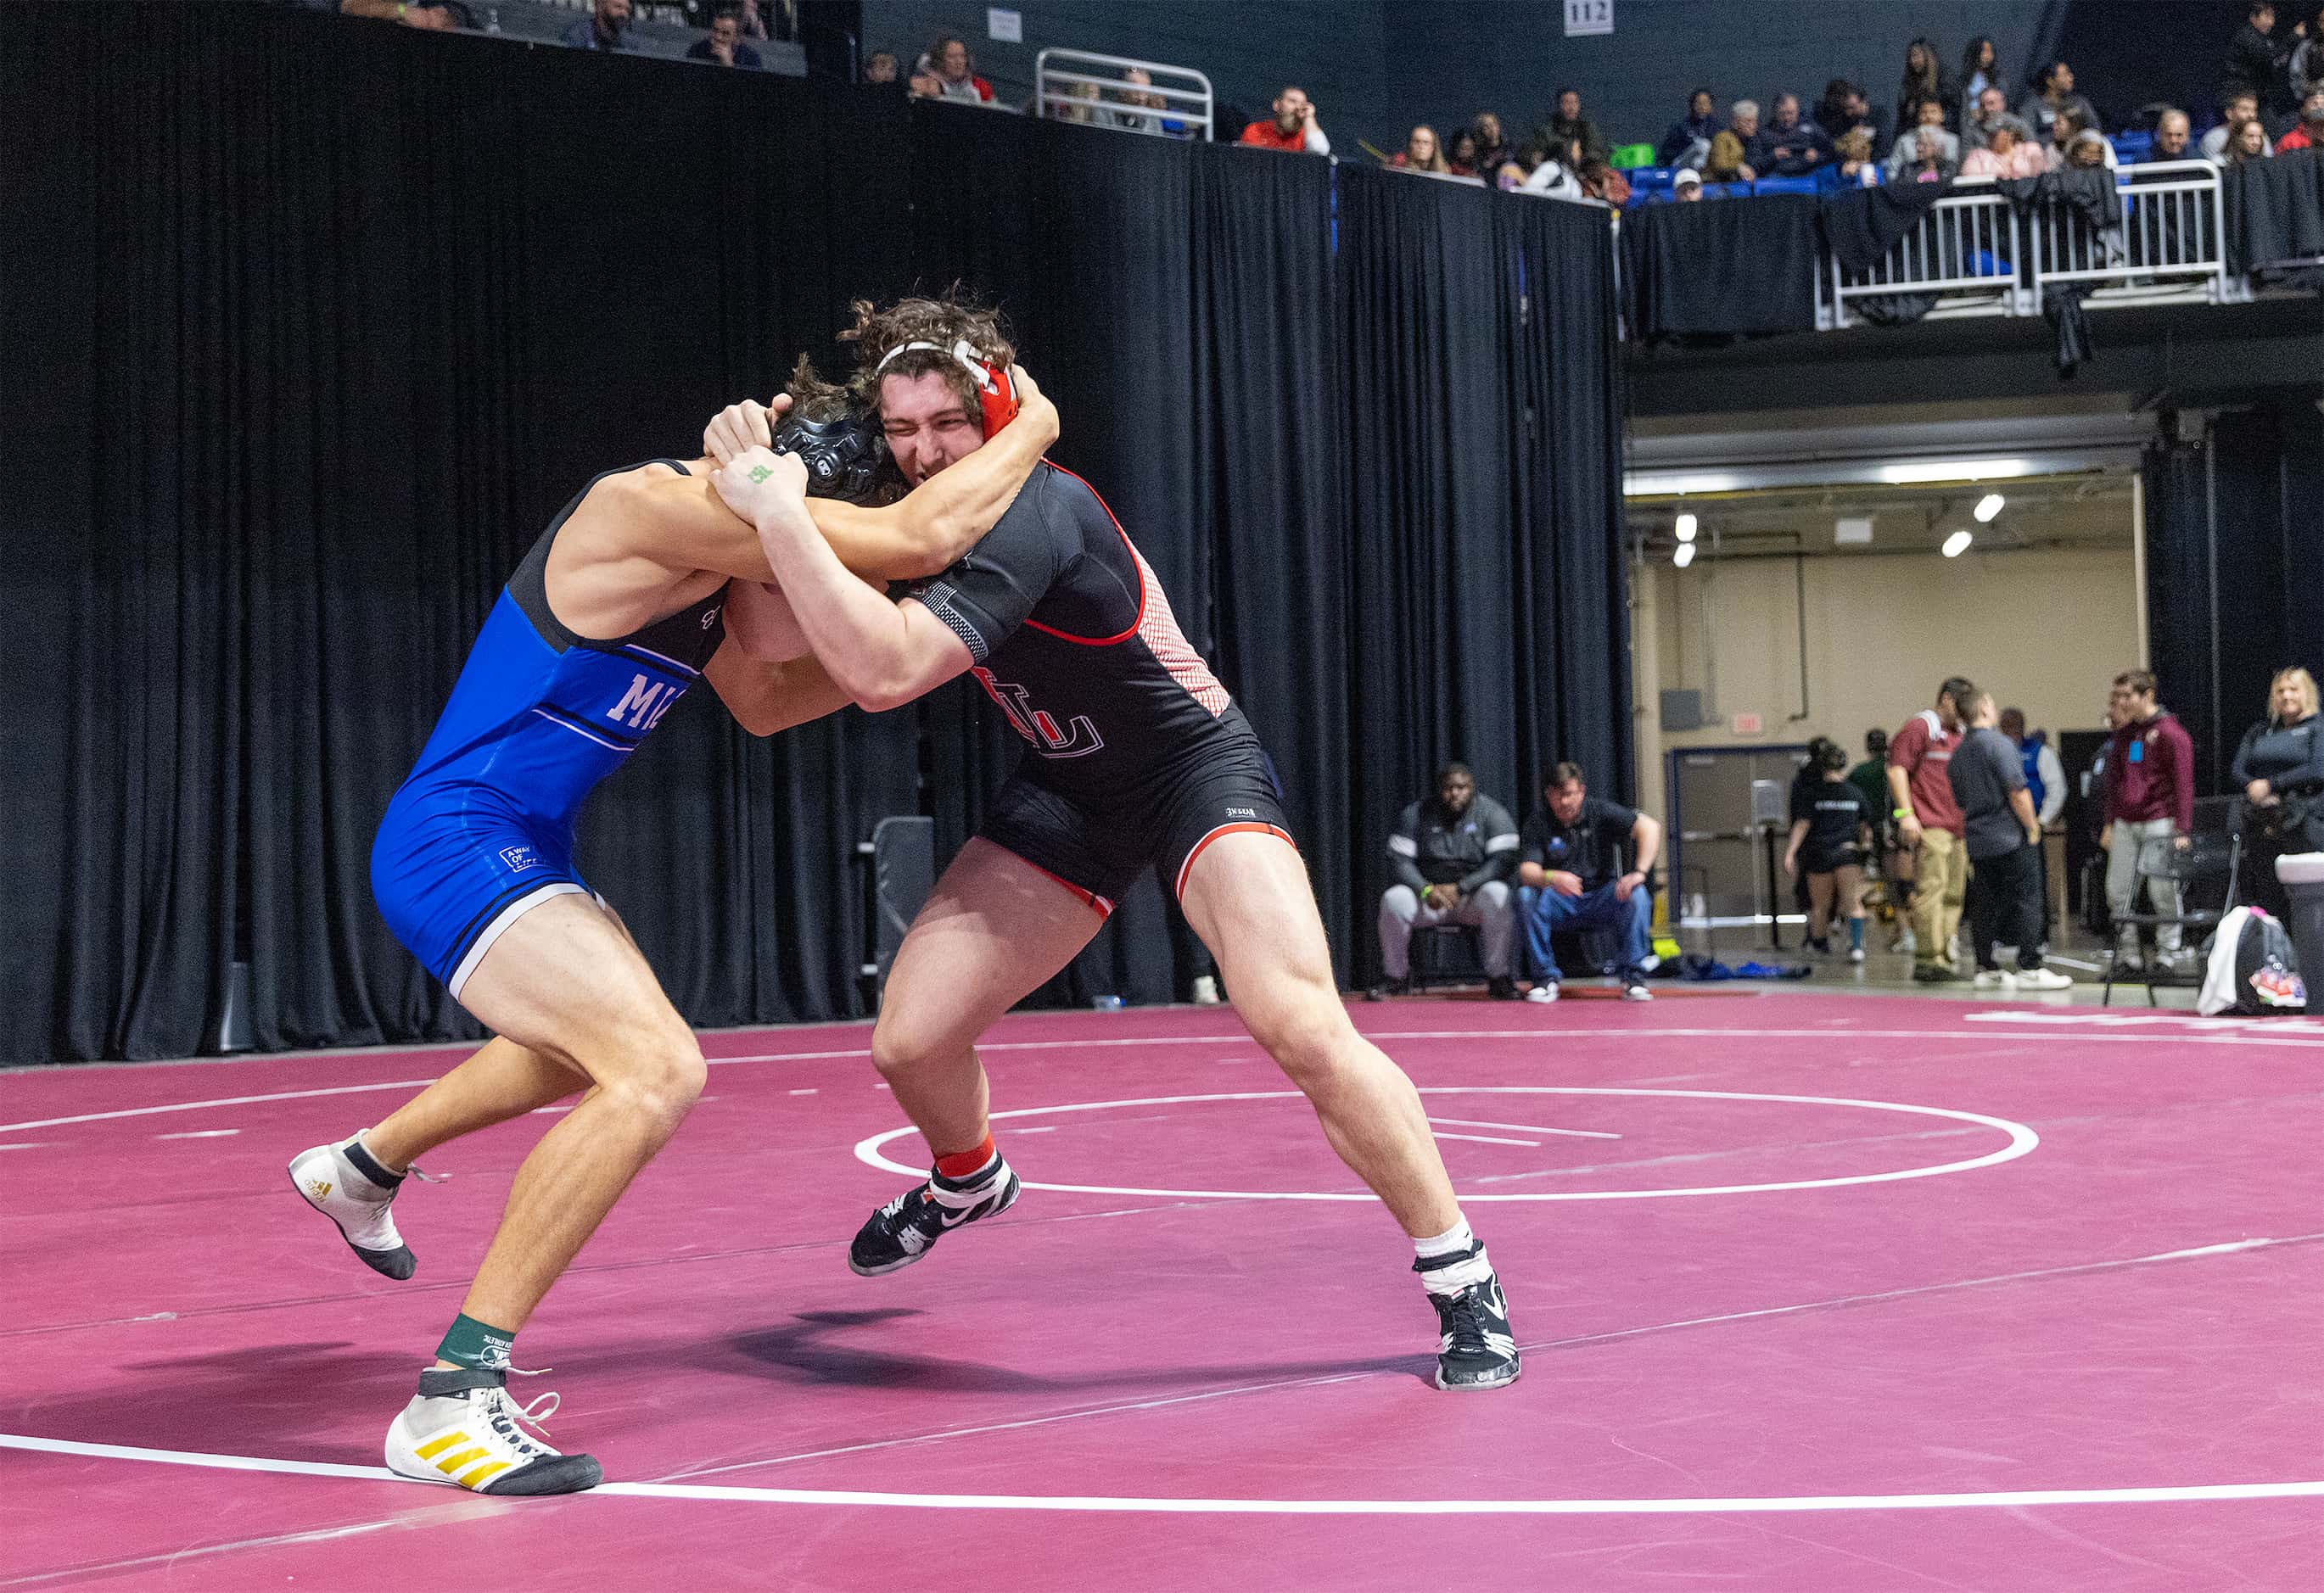 Payton Pierce from Lovejoy (right) wrestles Jack Ashley from Midlothian in the 5A boys 215...